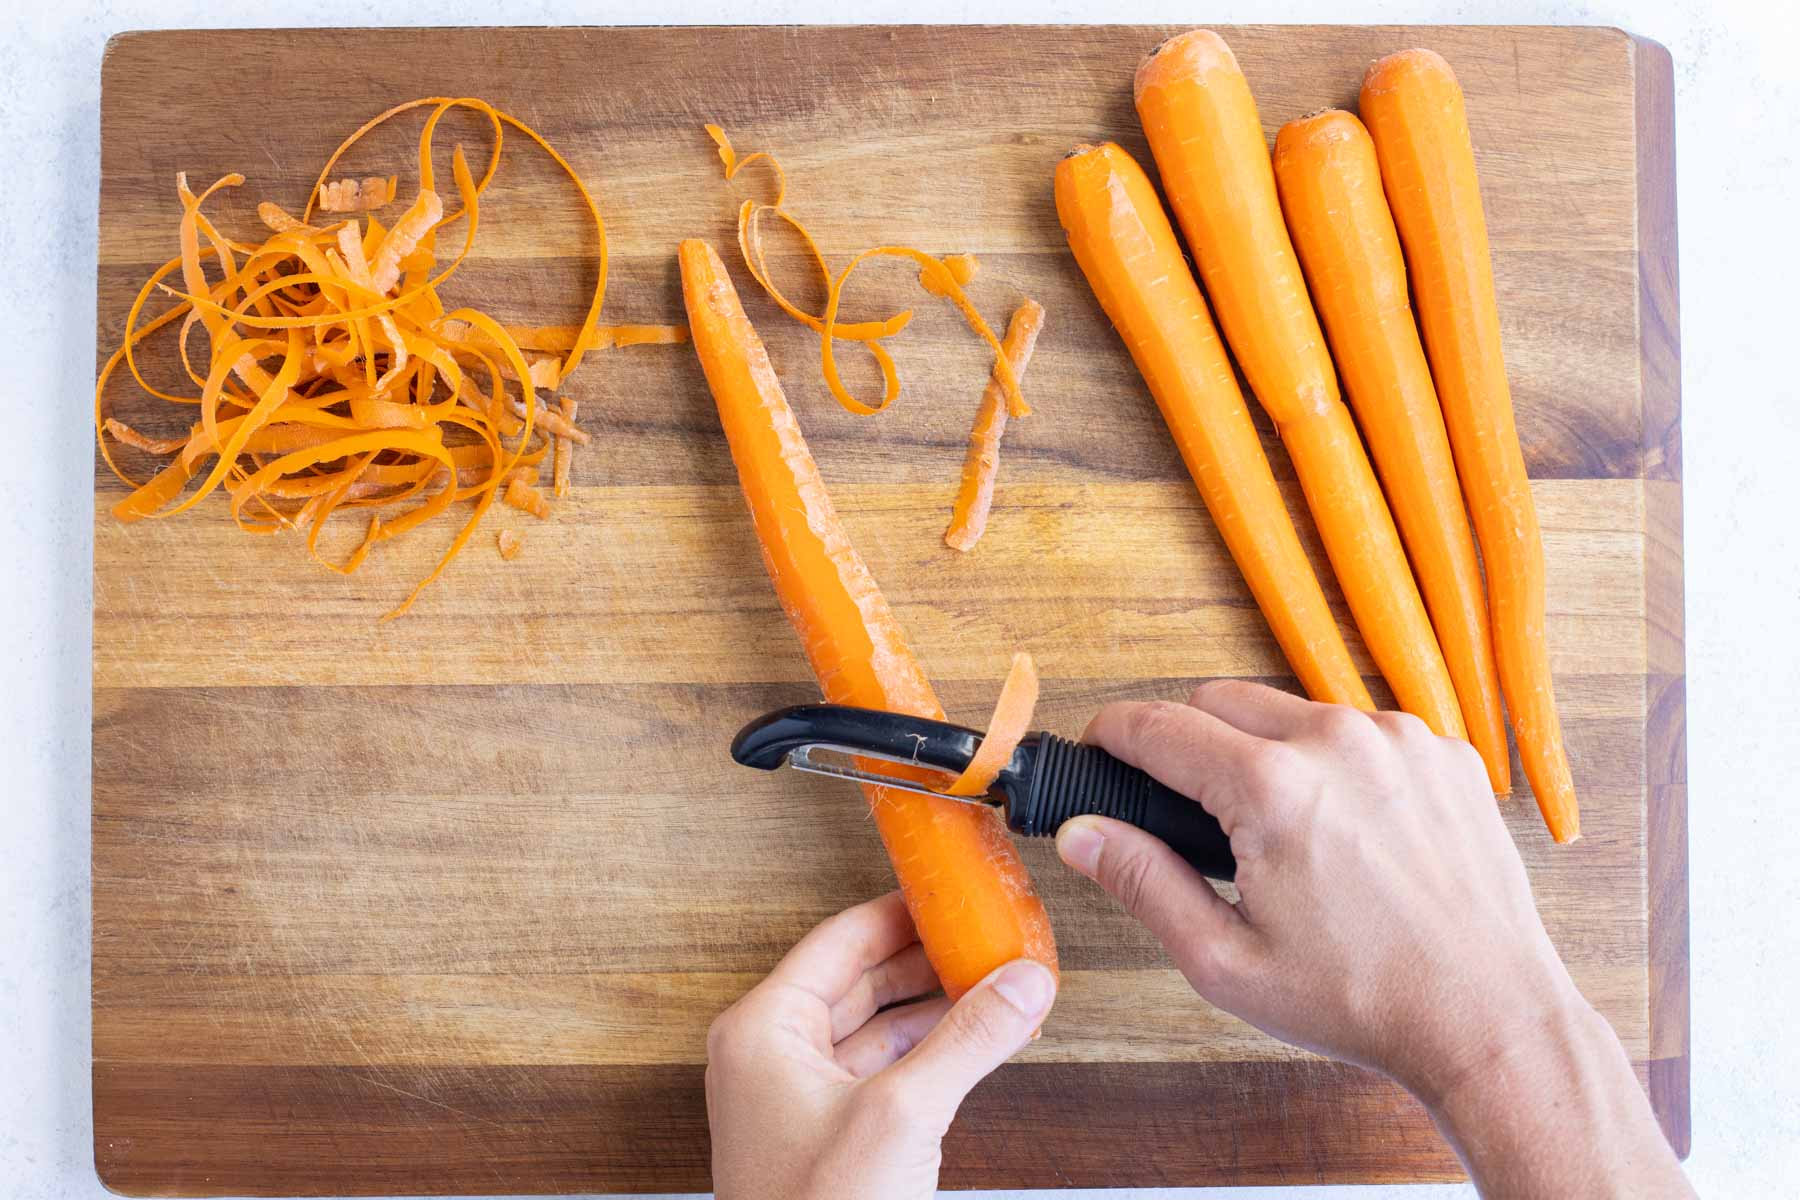 A peeler removes the skin from carrots.